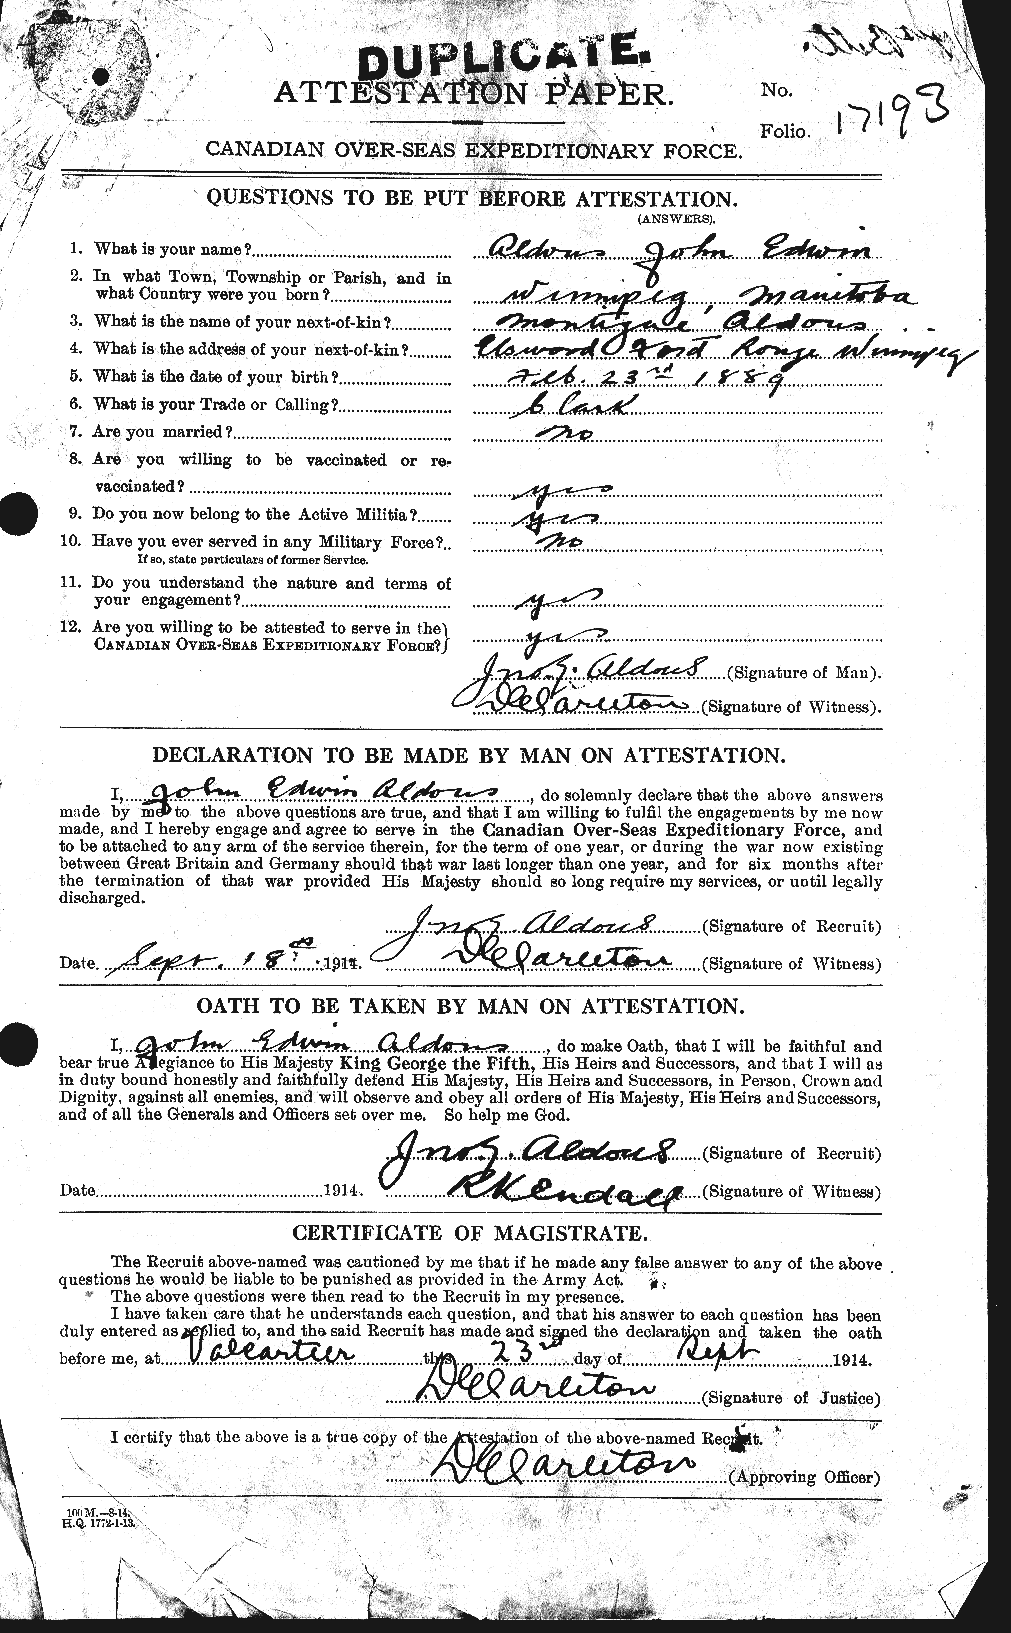 Personnel Records of the First World War - CEF 204924a